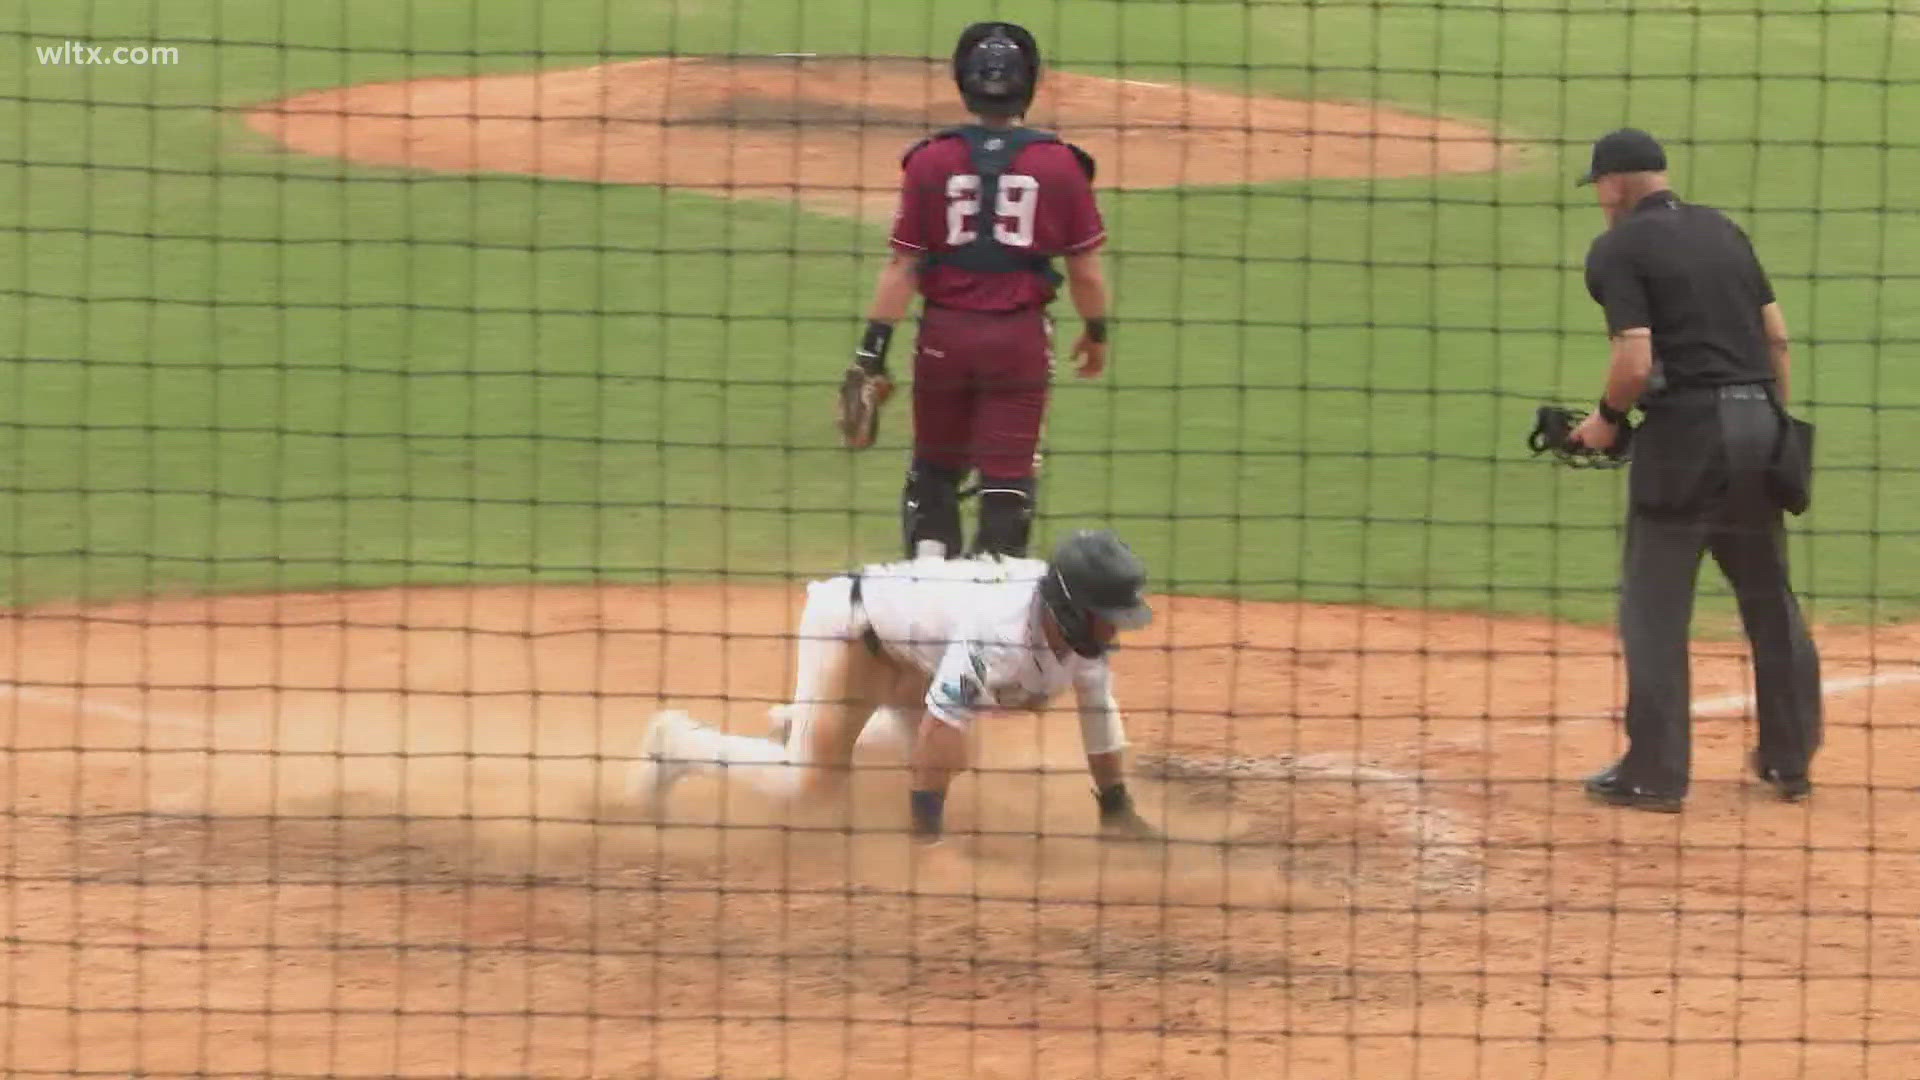 Highlights from Opening Night at the Lexington County Baseball Stadium as the Blowfish defeated the Macon Bacon 8-7